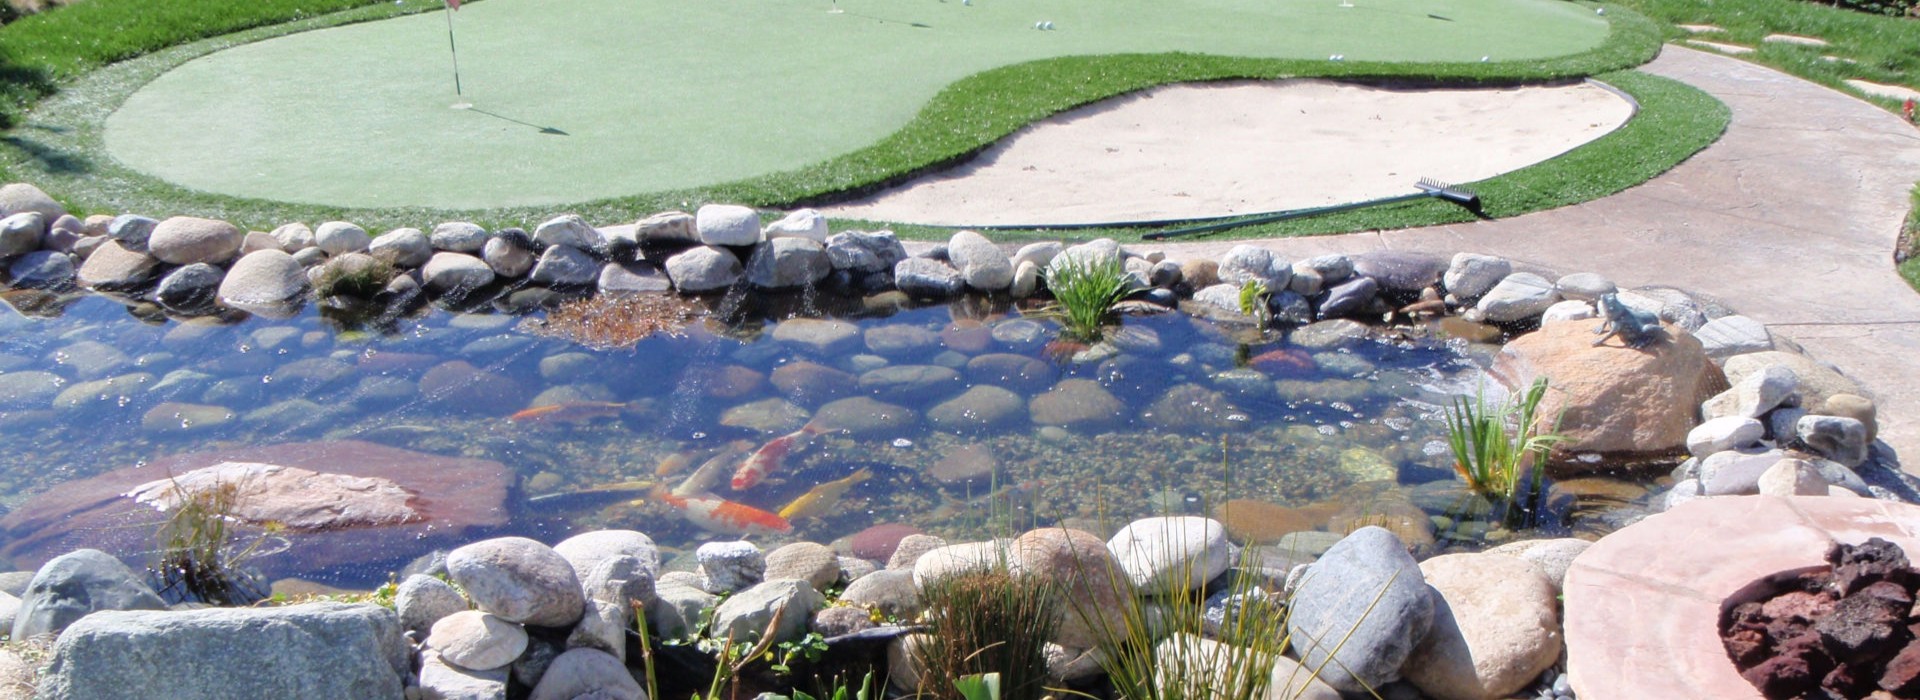 backyard-putting-green-and-pond-banner-1